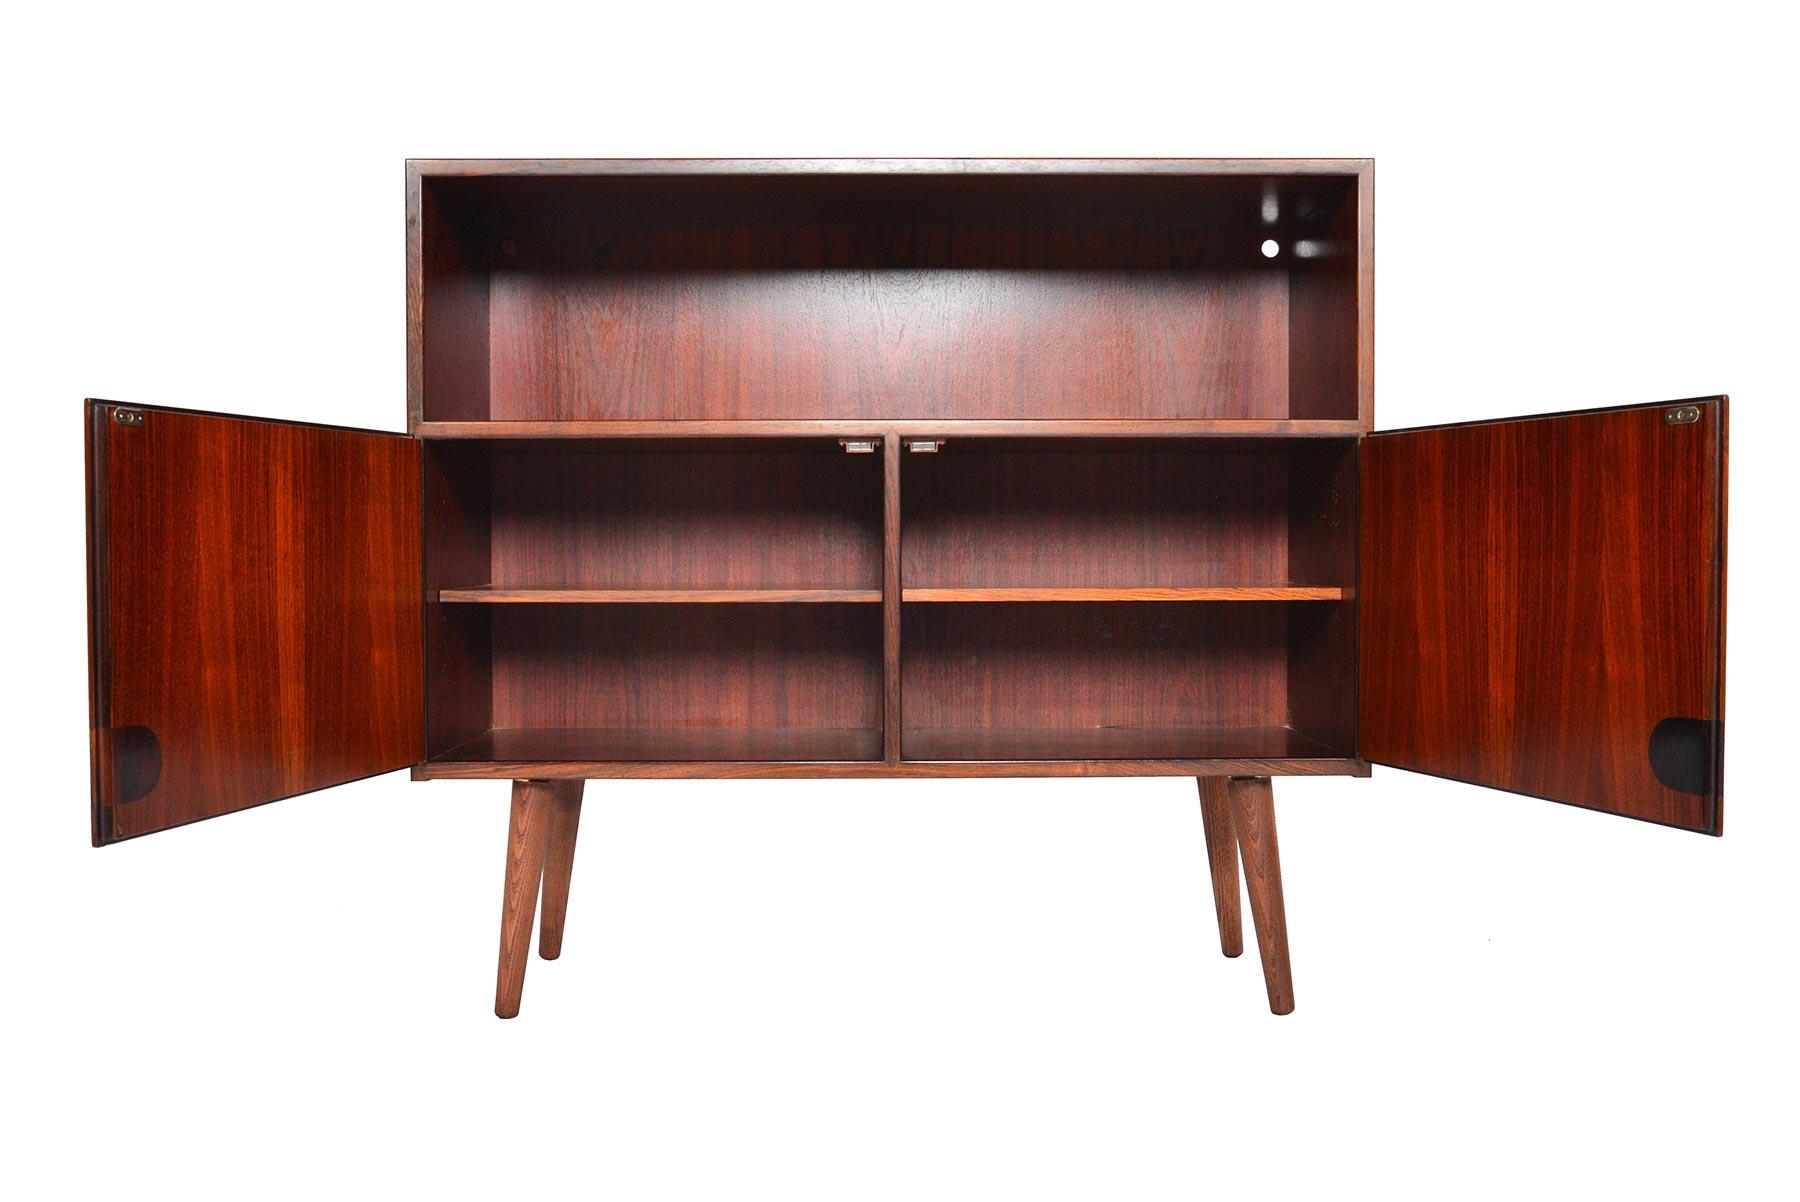 This small Danish modern rosewood bookcase is a perfect storage solution for any modern home. This piece features a narrow profile with an open cubby and two lower doors concealing two bays with adjustable shelving. Piece stands on canted spindle